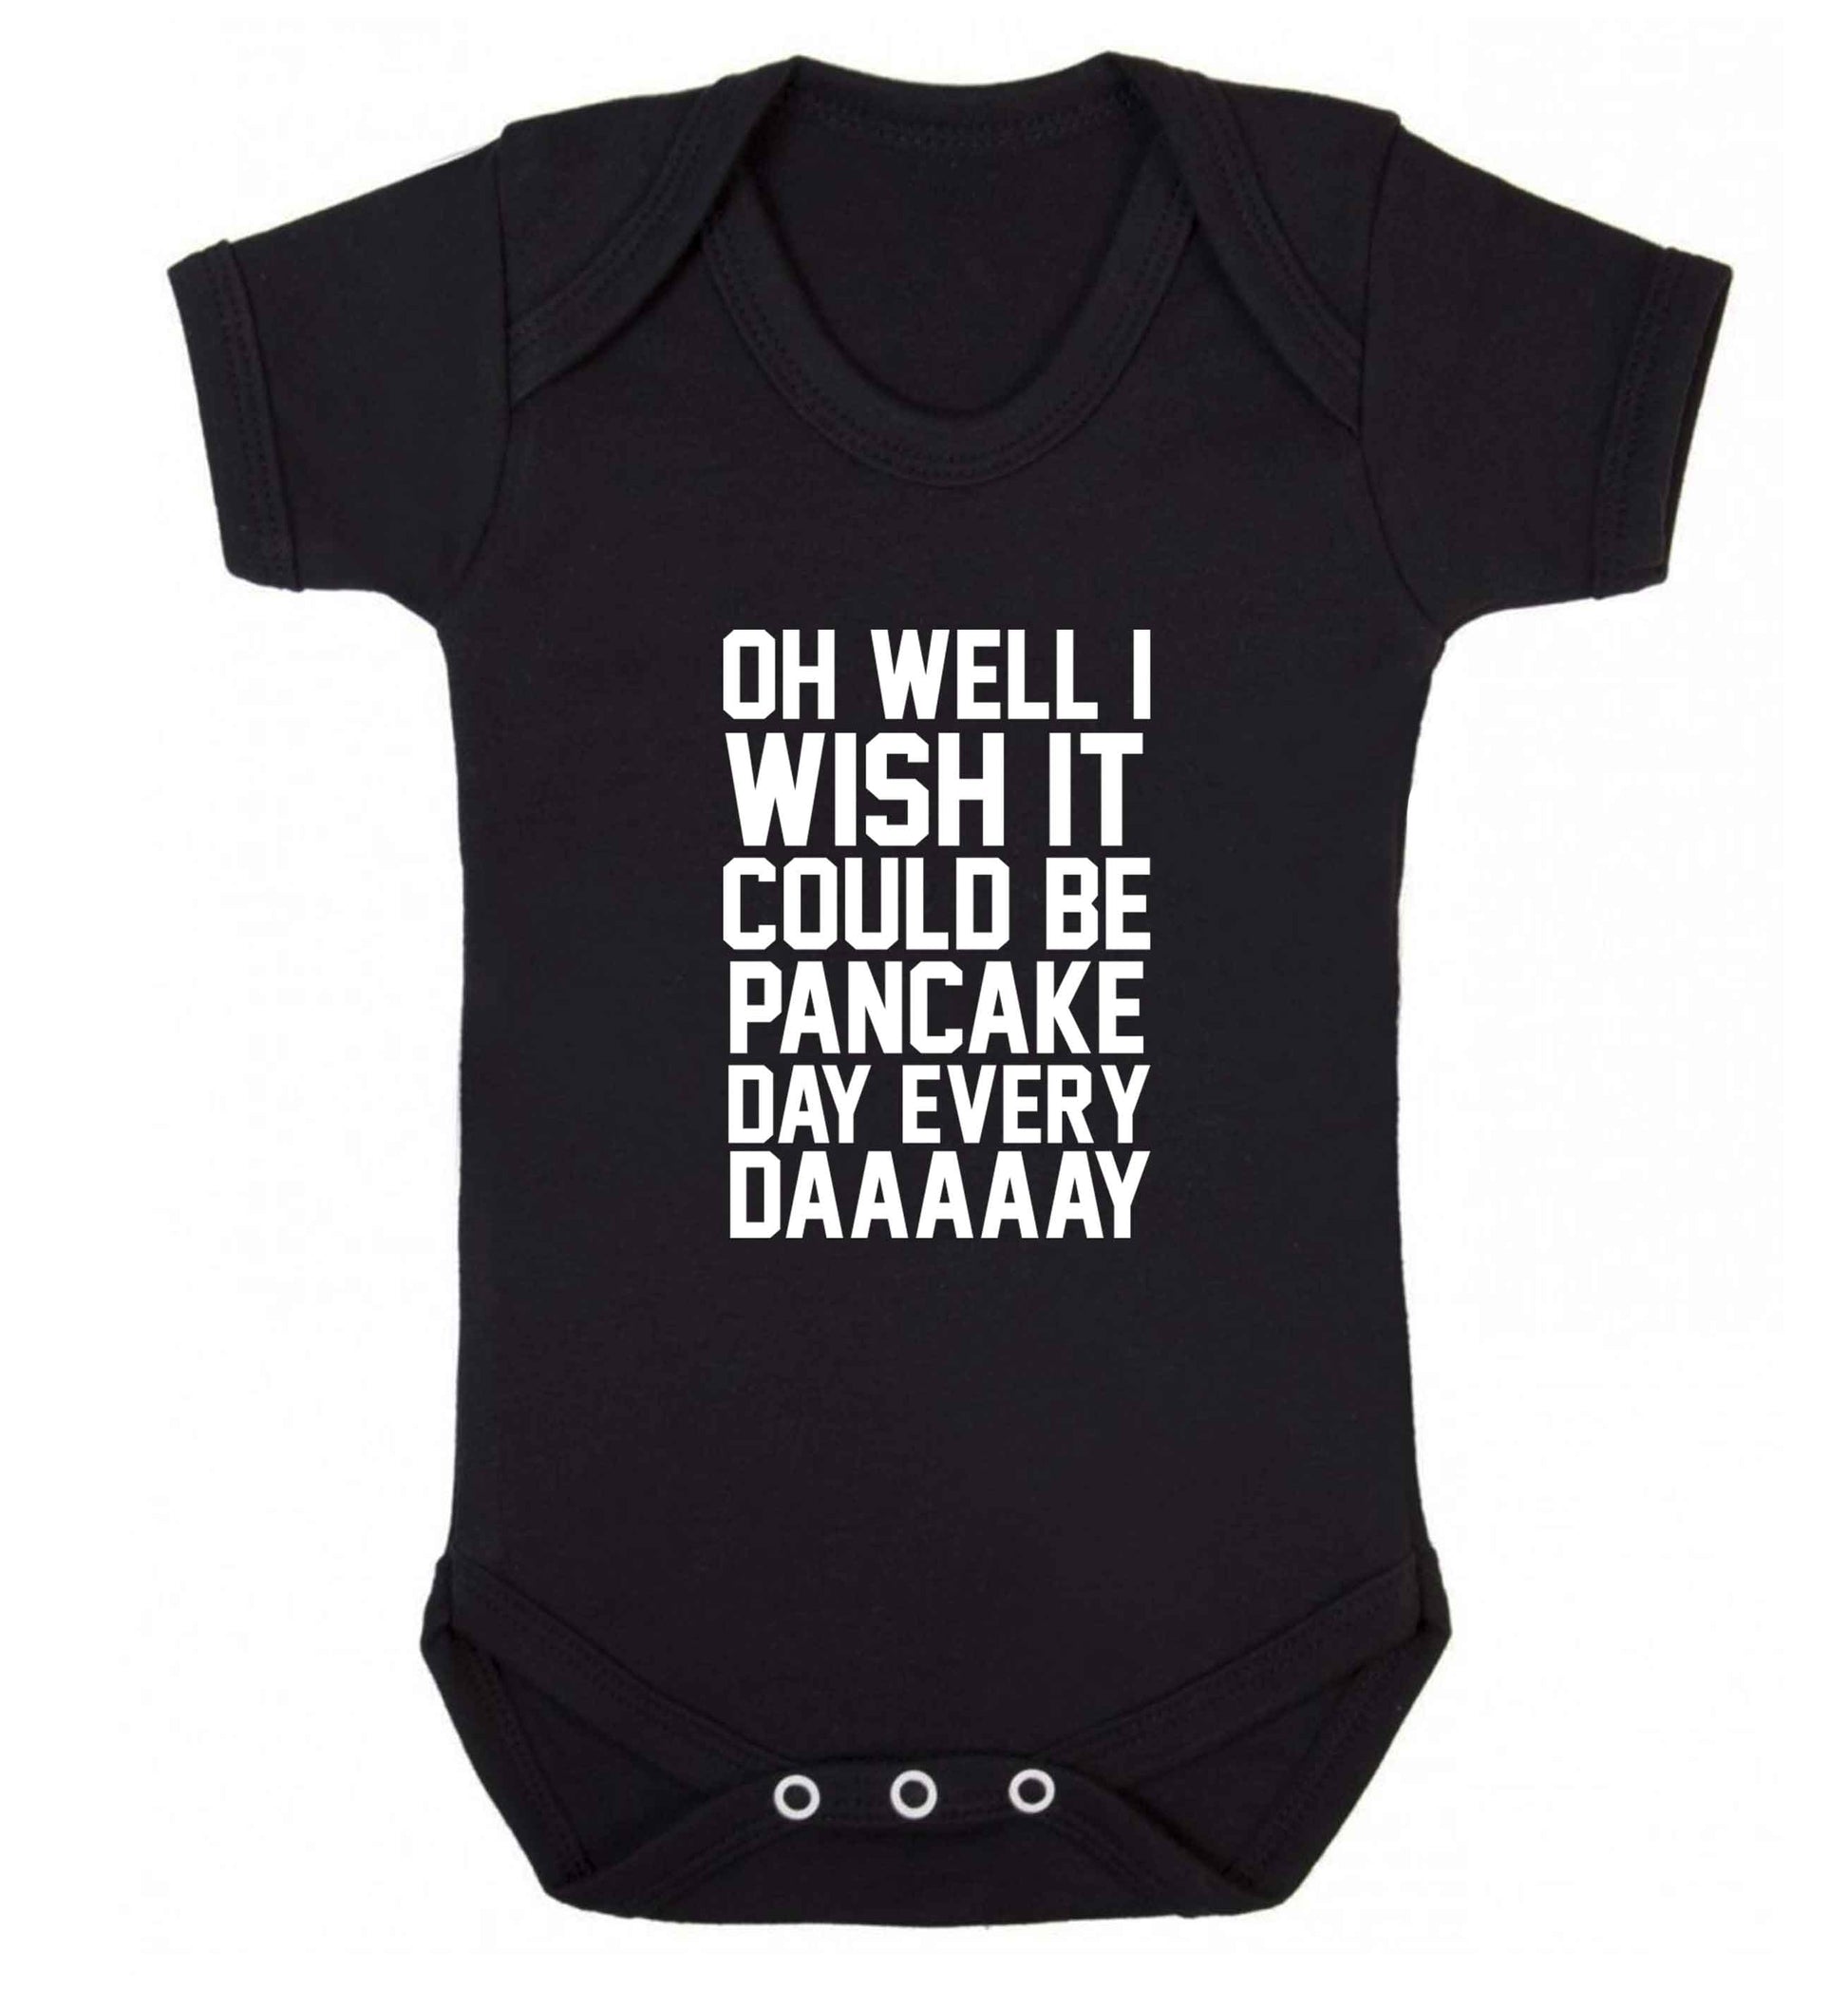 Oh well I wish it could be pancake day every day baby vest black 18-24 months